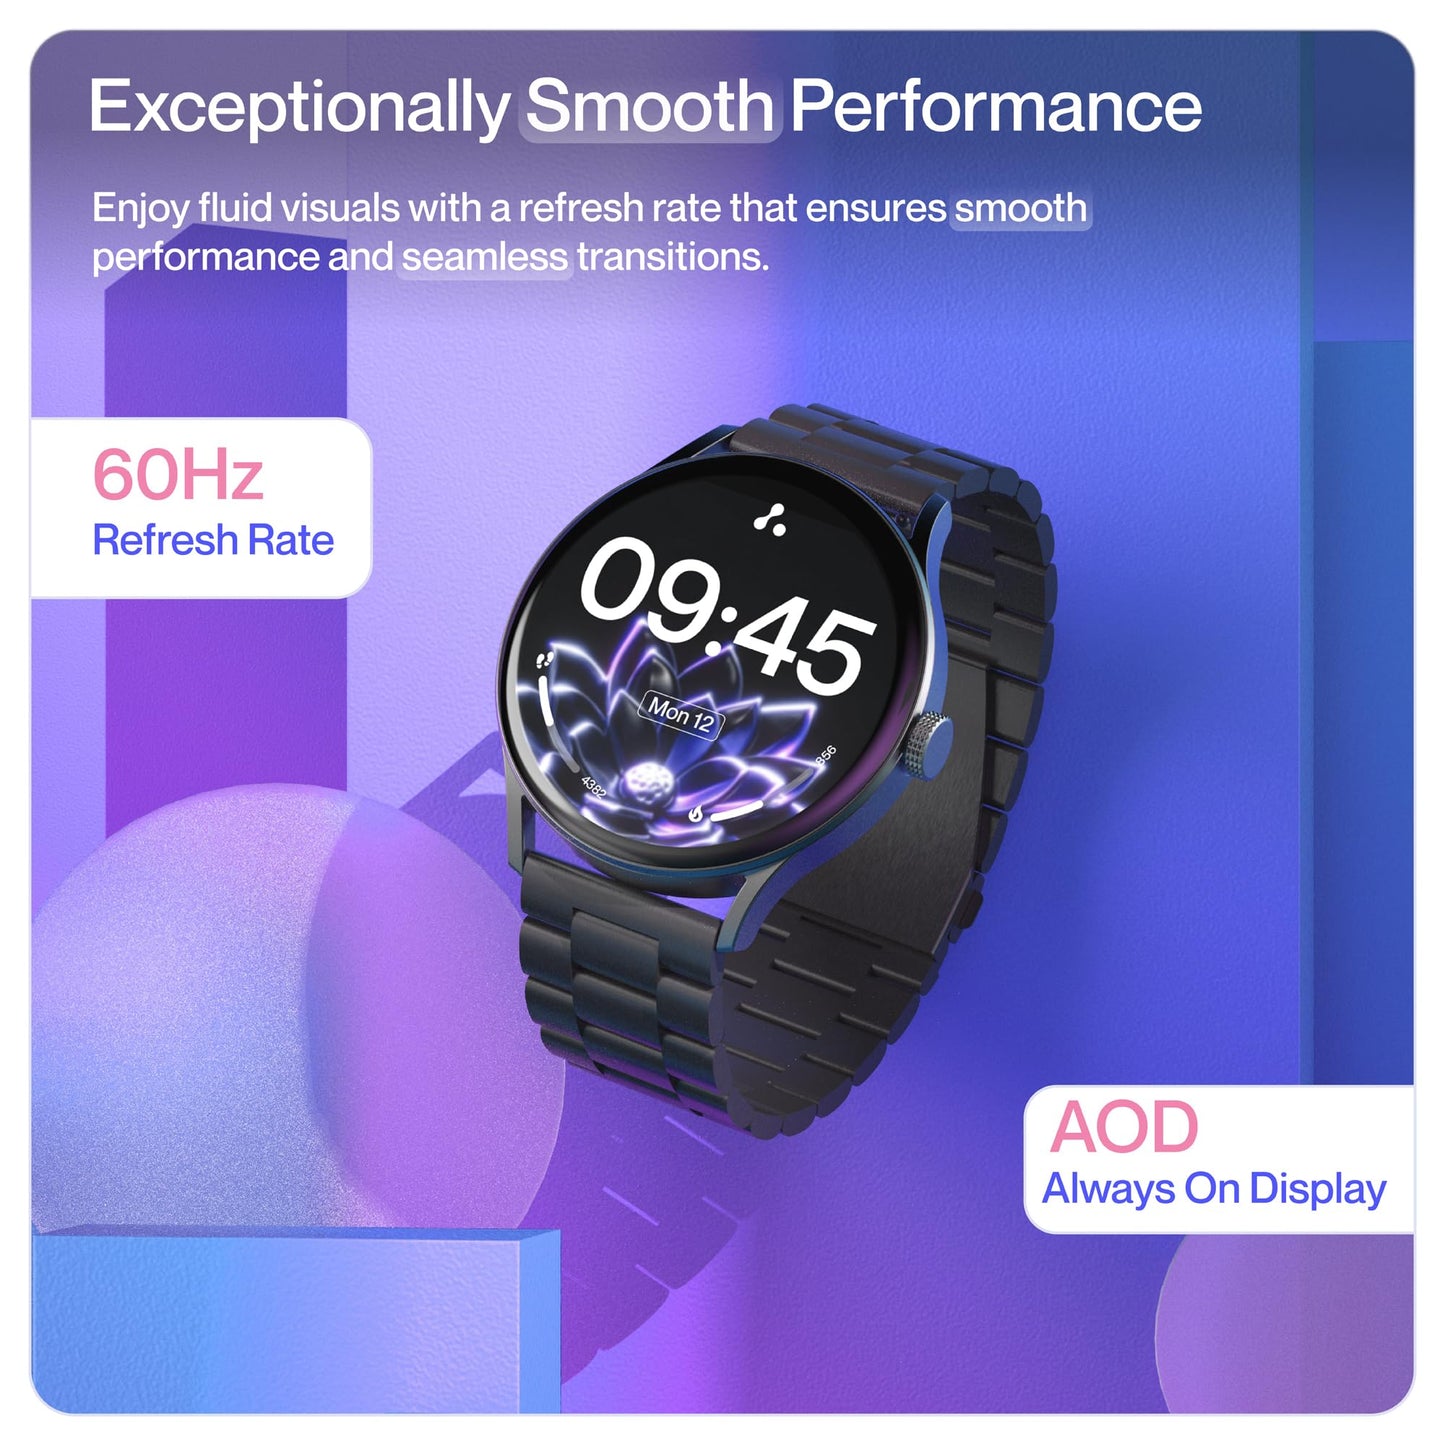 Ambrane 1.43" AMOLED Display, Bluetooth Calling SmartWatch, 1000 NITS Brightness, Functional Crown, 60Hz Refresh Rate, 100+ Sports Mode with IP68, 100+ Watch Faces (Marble, Brown)